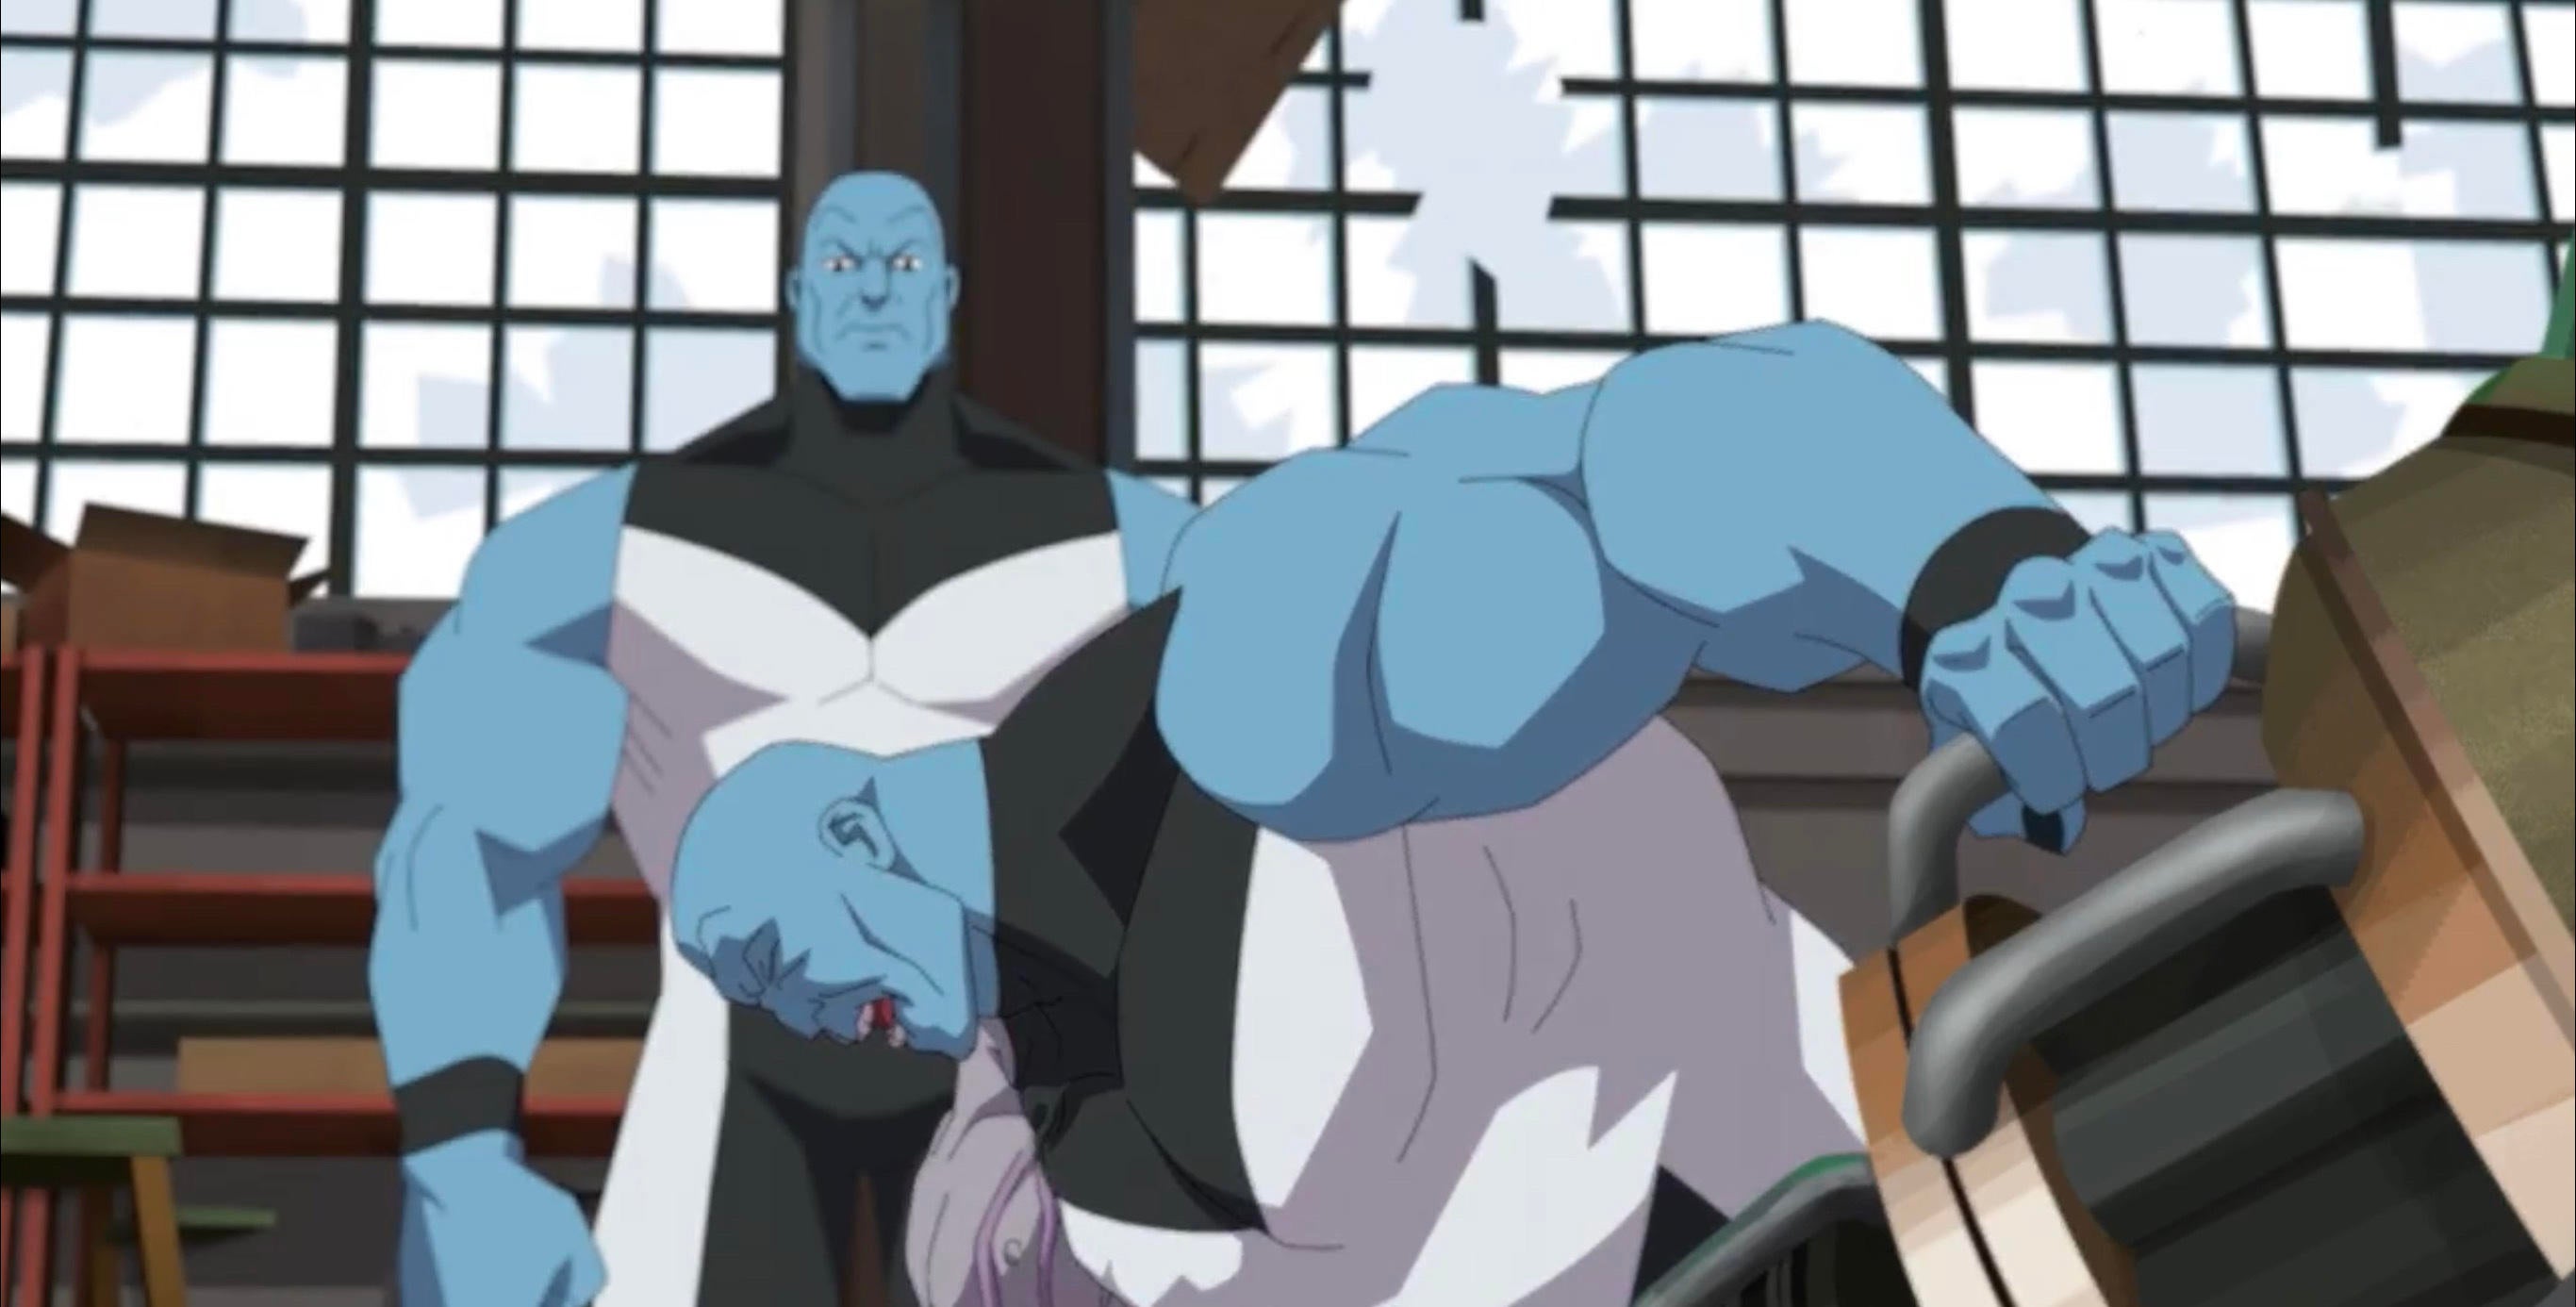 Invincible Season 2 Episode 4 Introduces [SPOILER] - But What Are